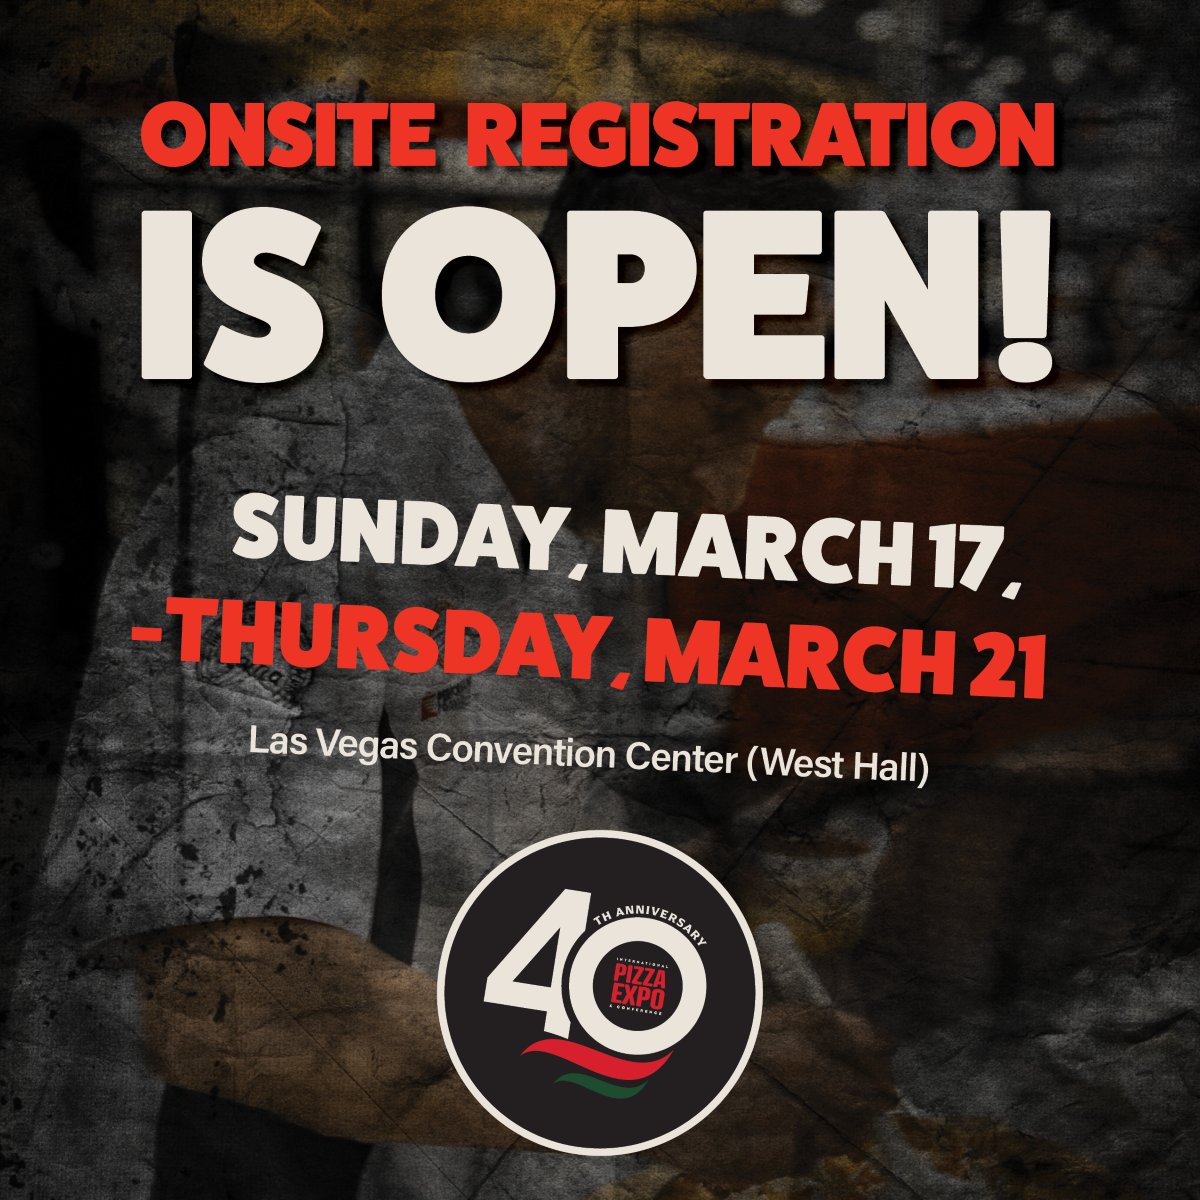 Onsite registration is open!🎉 Grab your badges now and get ready for an unforgettable experience. 🎟 Check our show schedule for registration hours. See you there! 😄 View onsite registration hours: hubs.ly/Q02pyqfv0 . #PizzaExpo #PizzaToday #PizzaCon #Expo